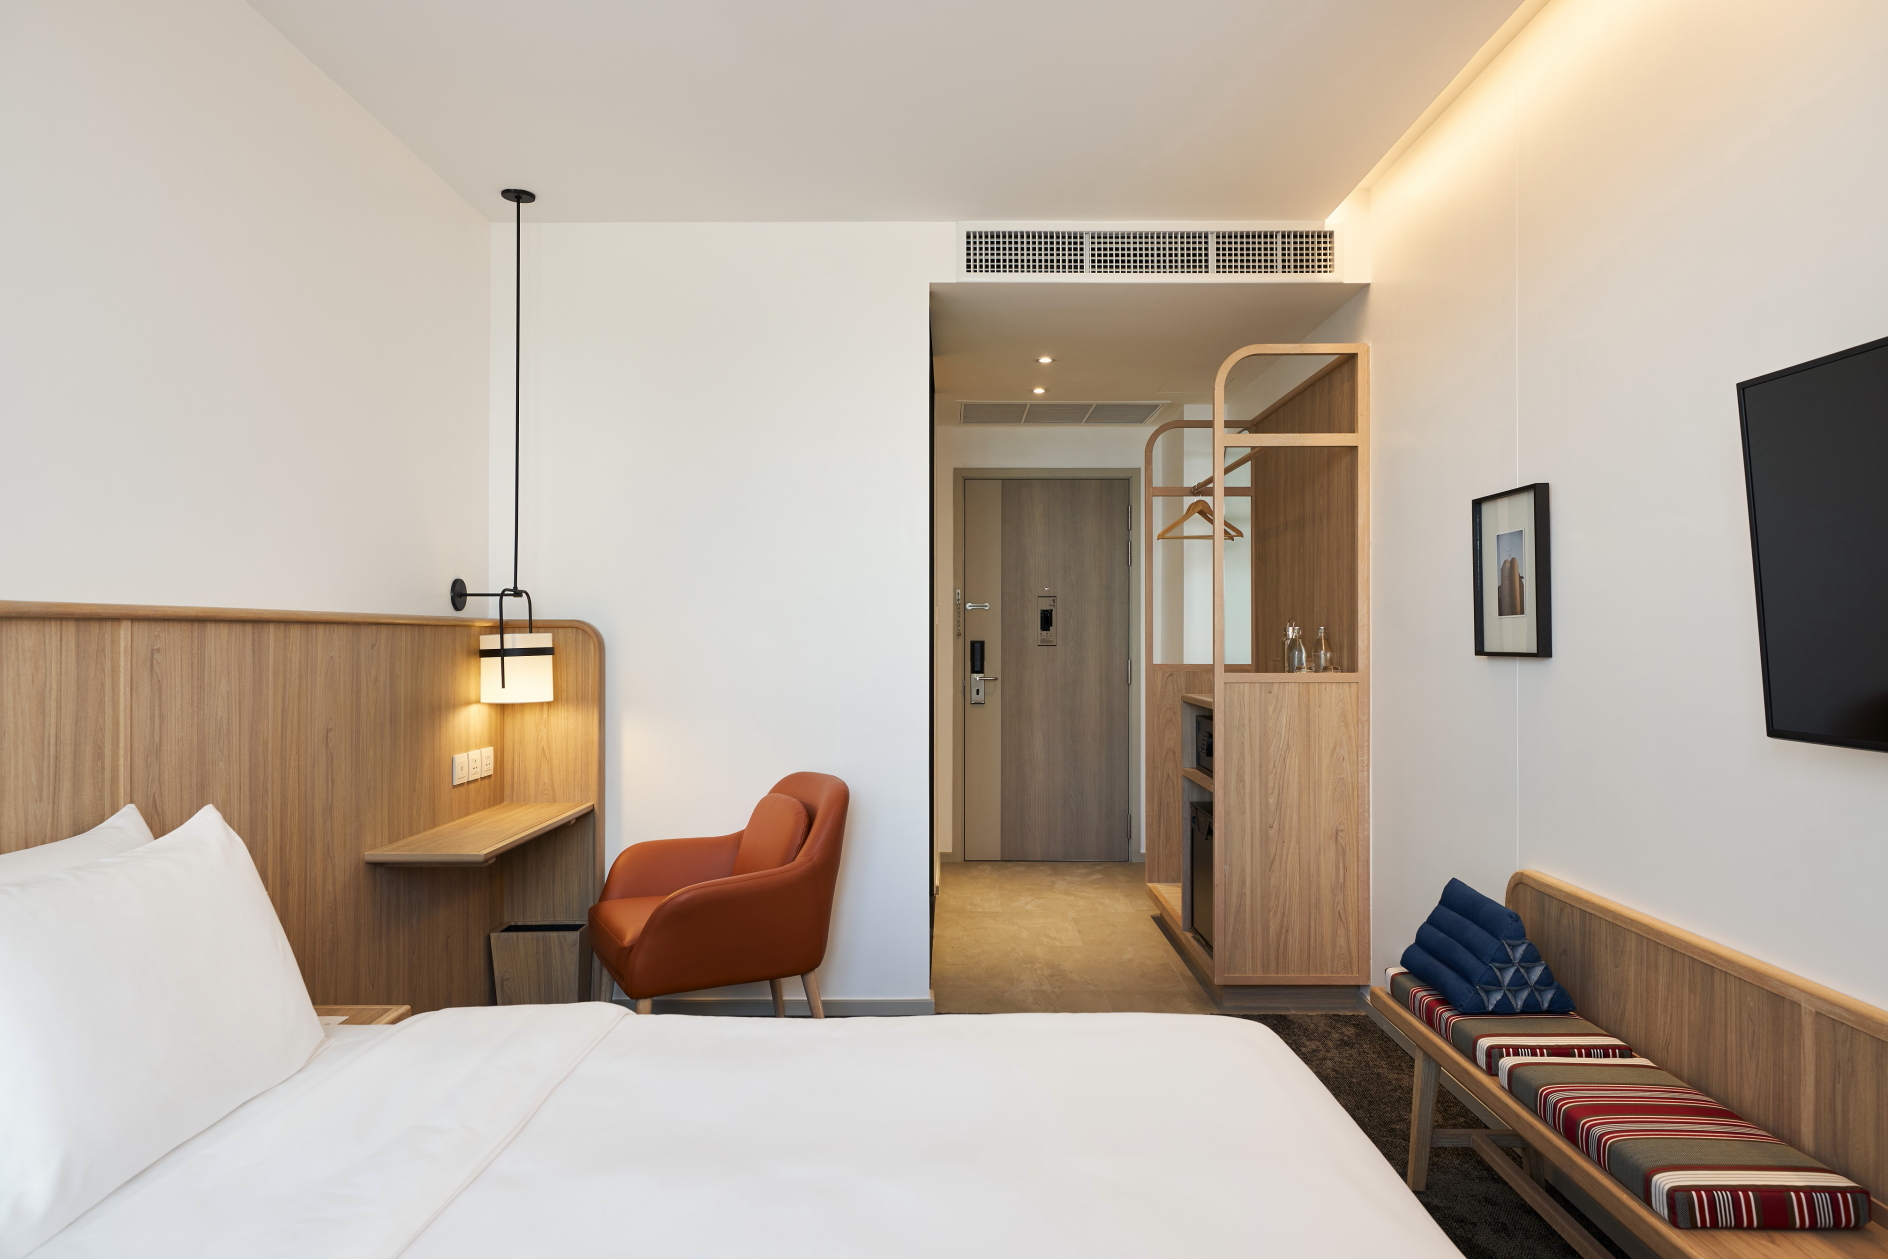 Asai Bangkok Chinatown features 224 rooms ranging in size from 18 – 26 sqm Click to enlarge.